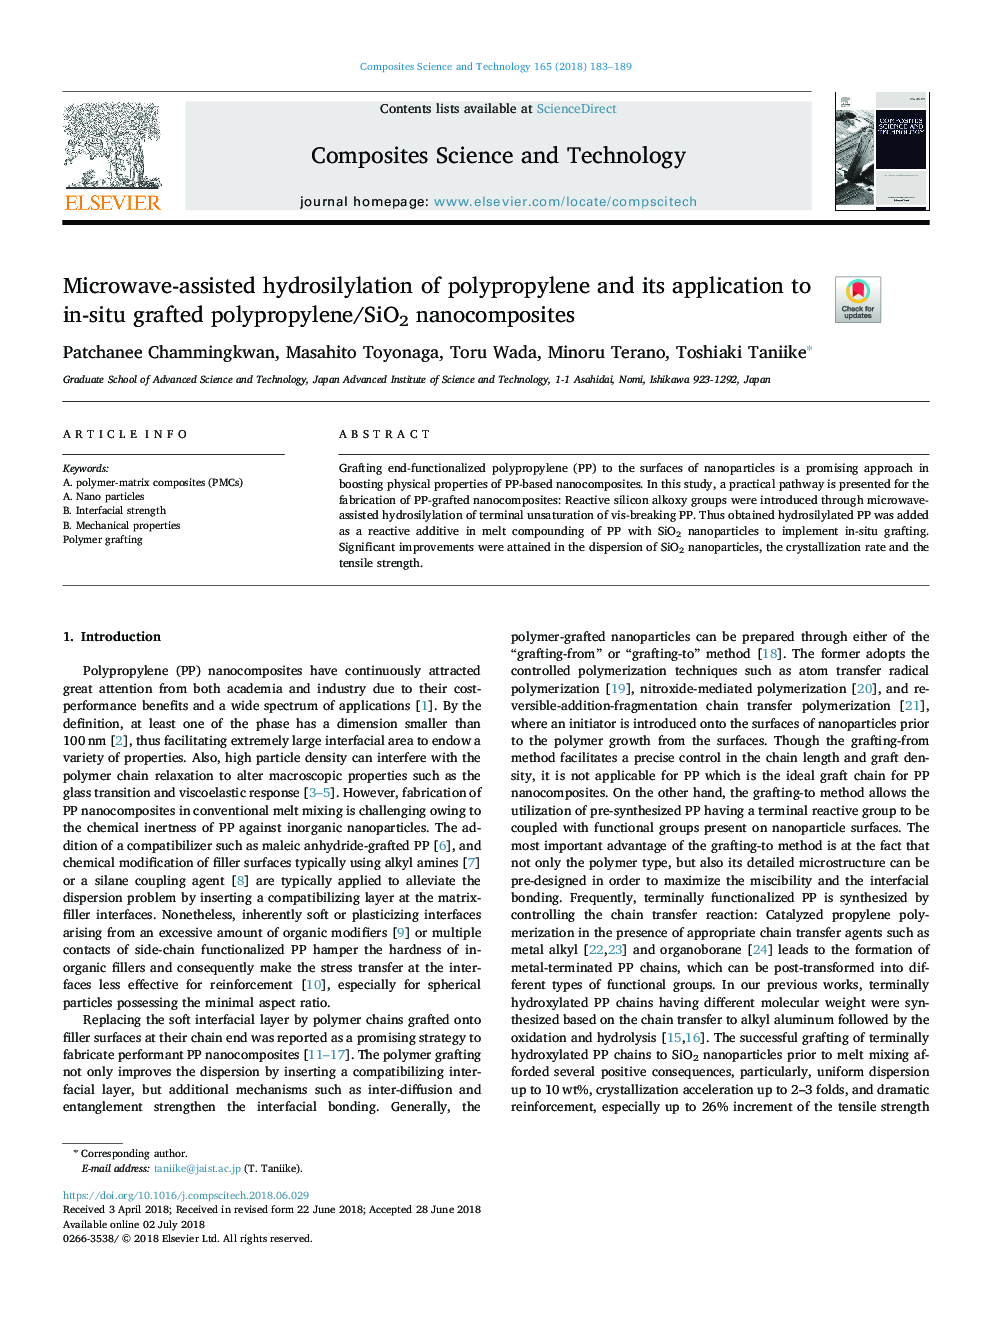 Microwave-assisted hydrosilylation of polypropylene and its application to in-situ grafted polypropylene/SiO2 nanocomposites